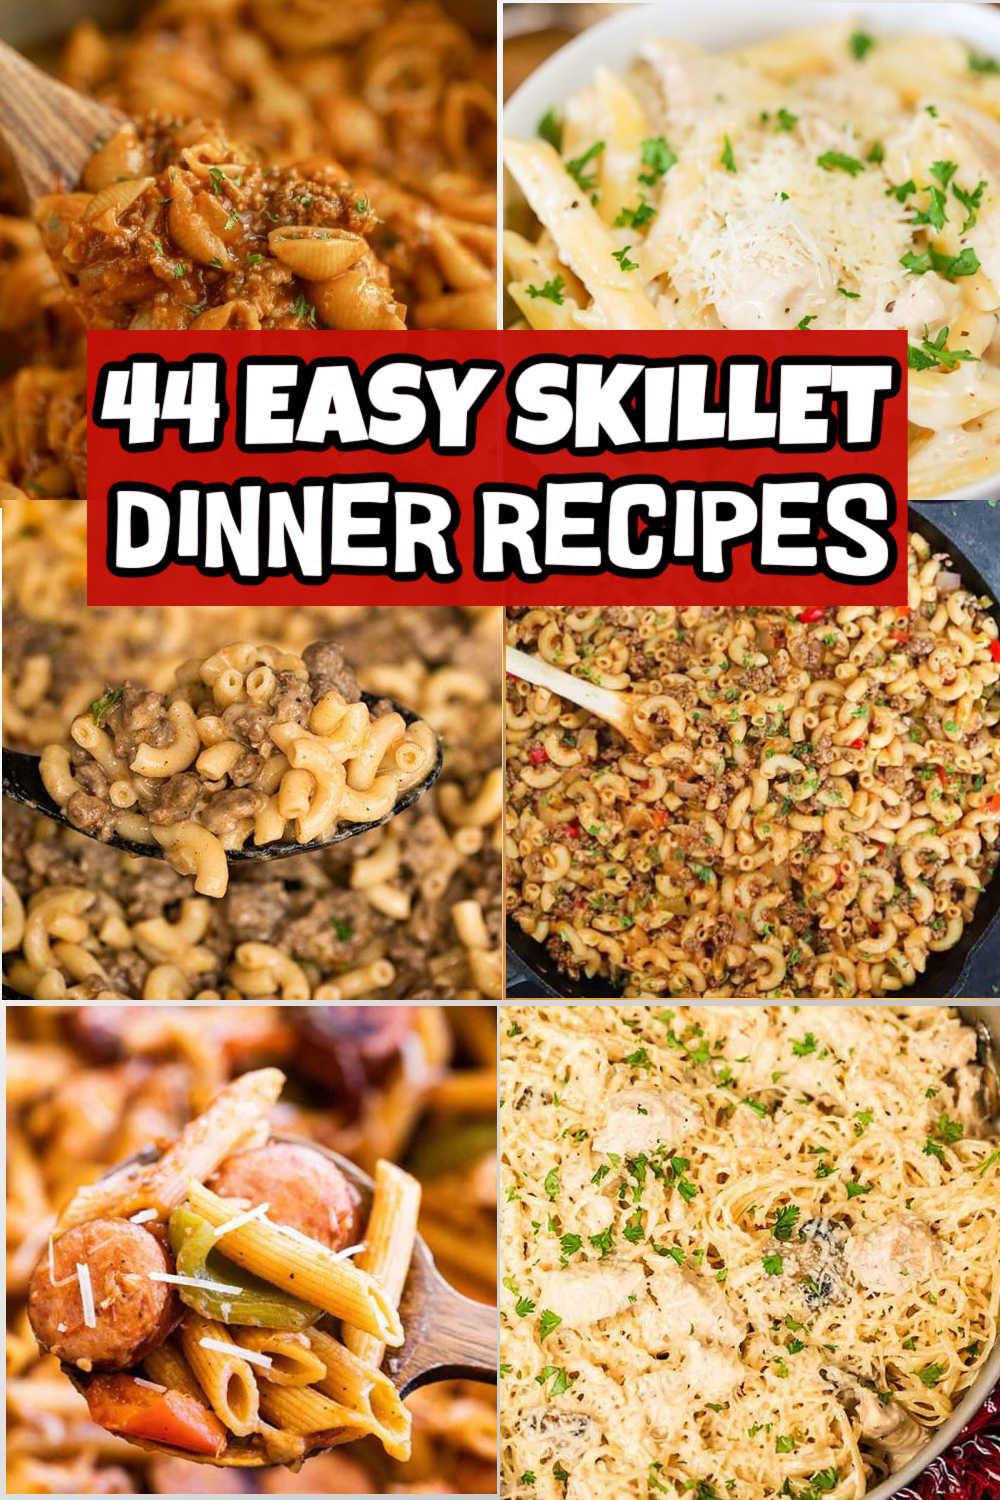 44 of the Best Skillet Recipes - Easy Cast Iron Skillet Recipes